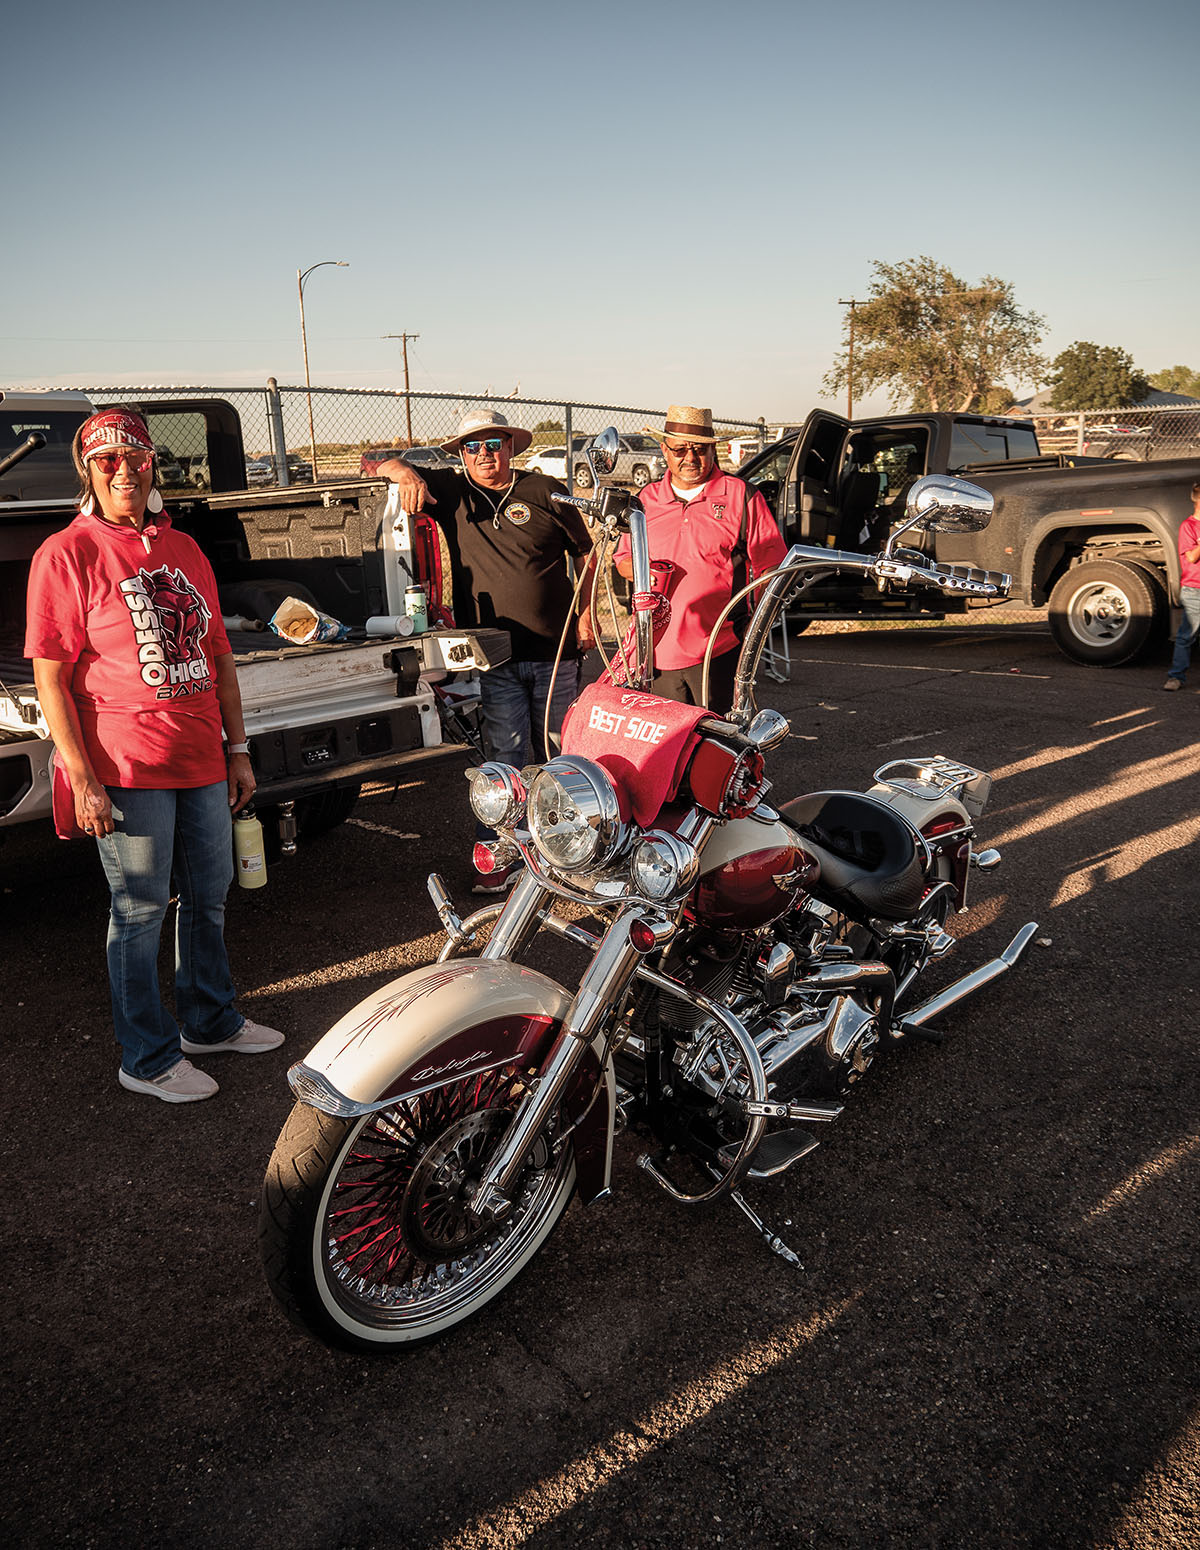 A group of men stand around a motorcycle